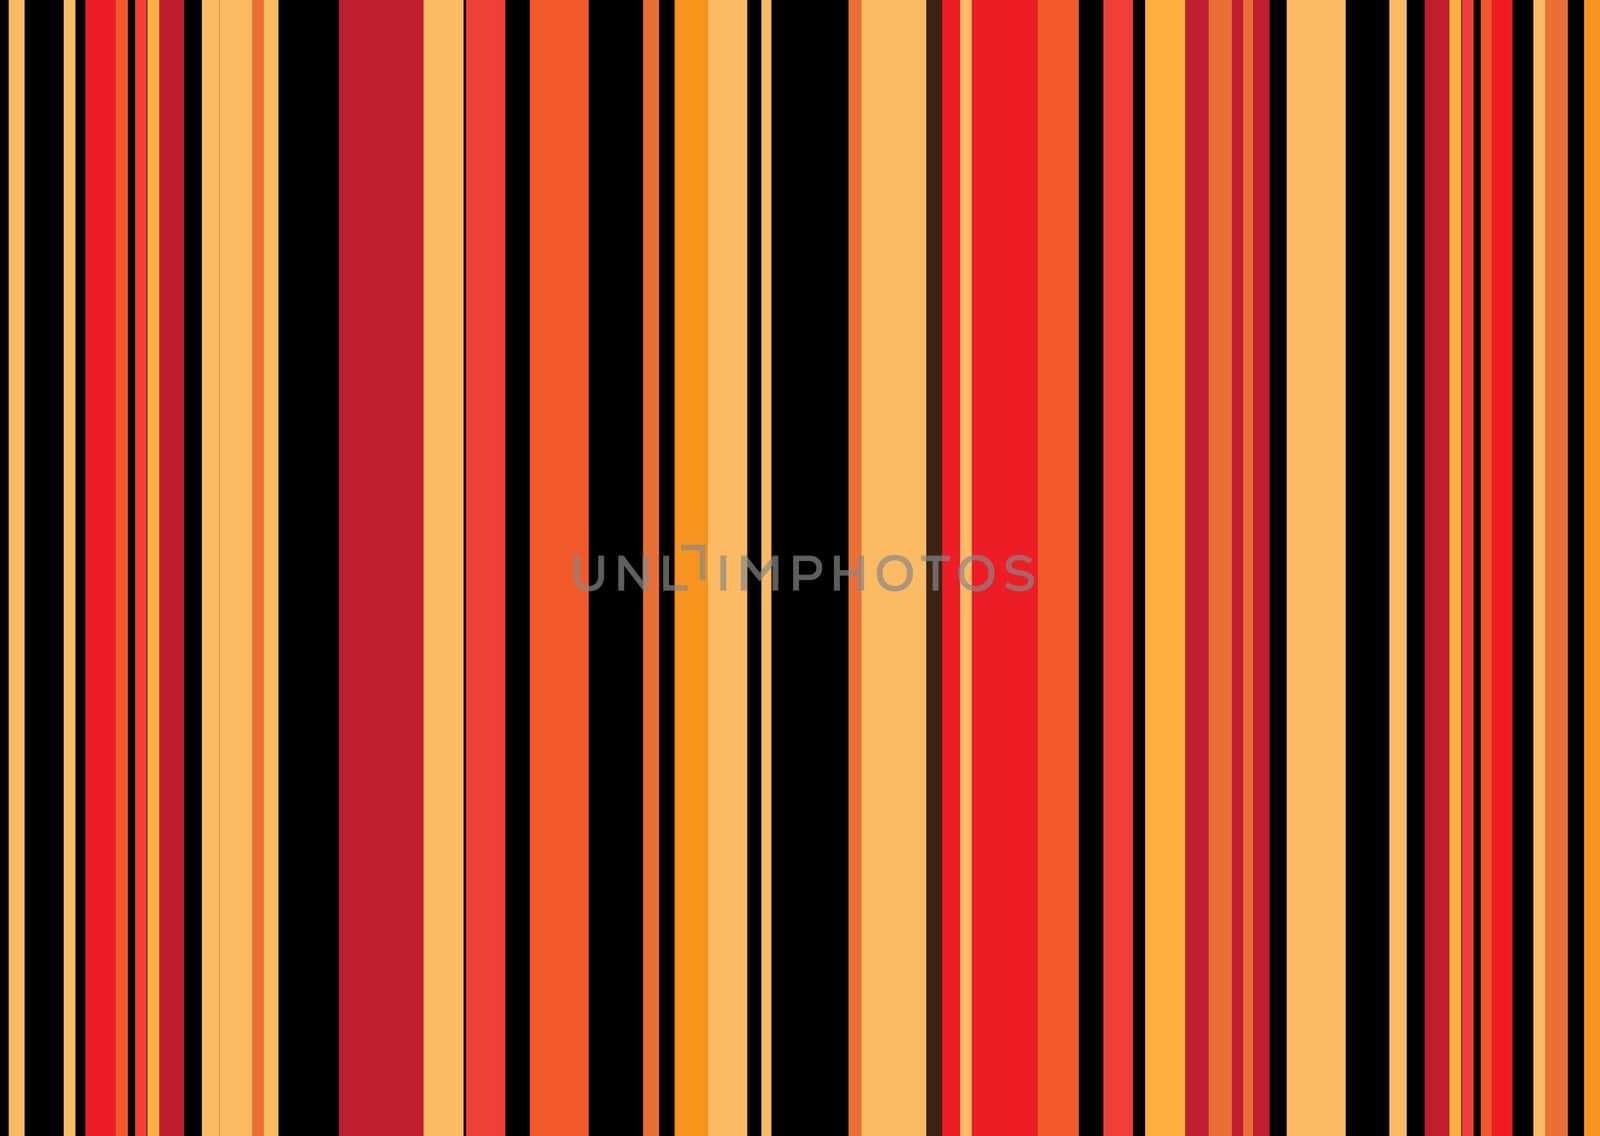 Retro coloured abstract striped background that would make an ideal wallpaper